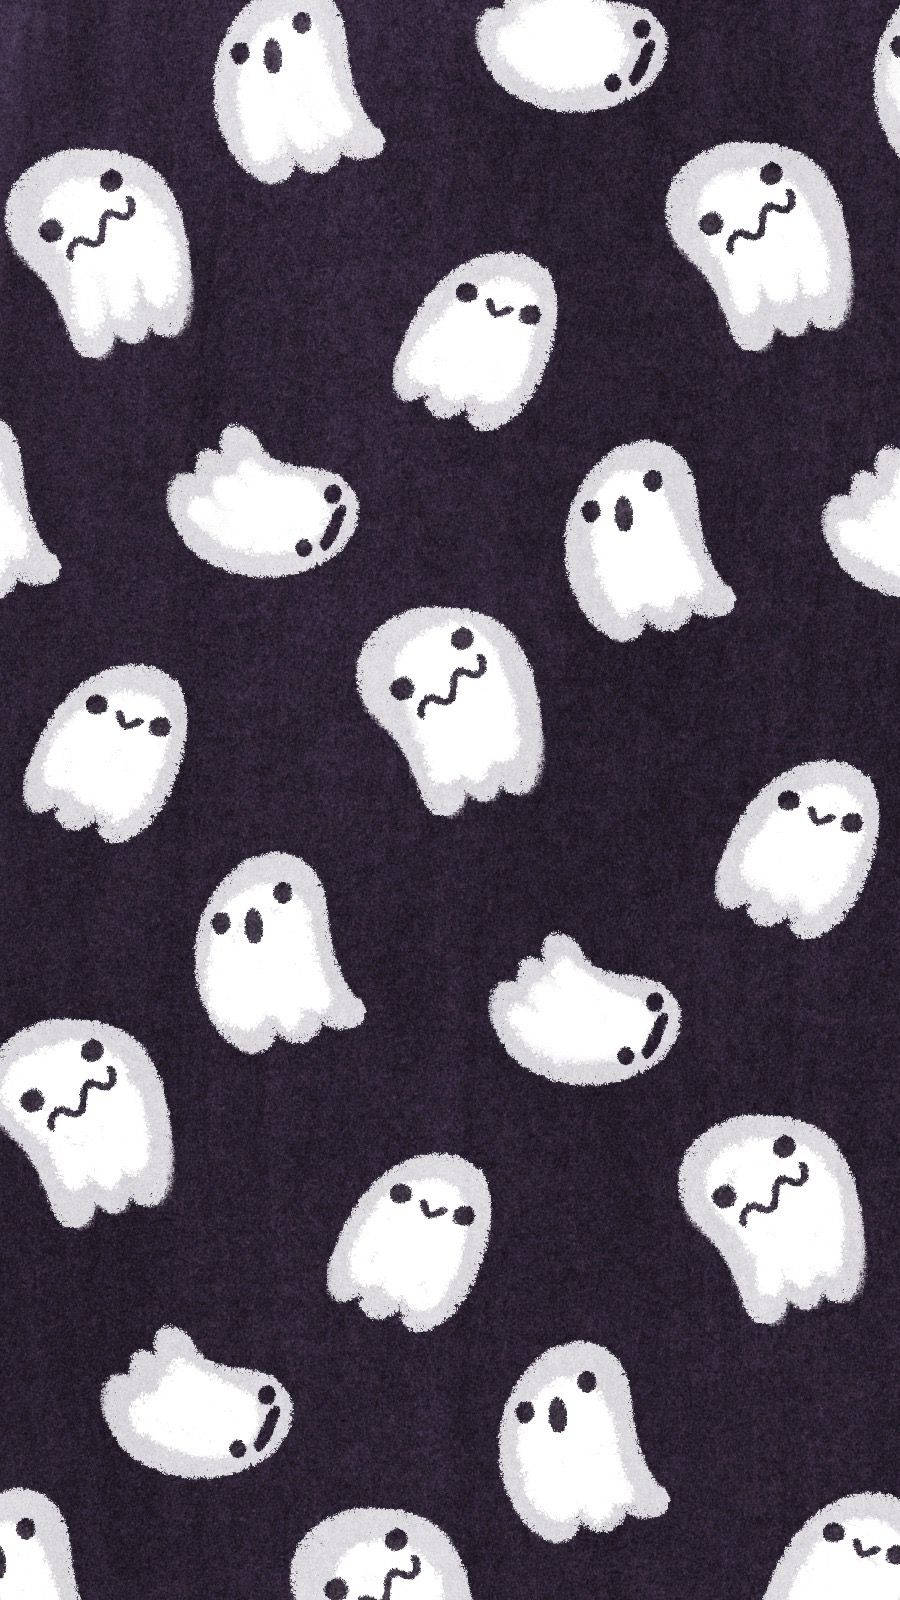 "Share the Halloween spirit with this cute phone!" Wallpaper